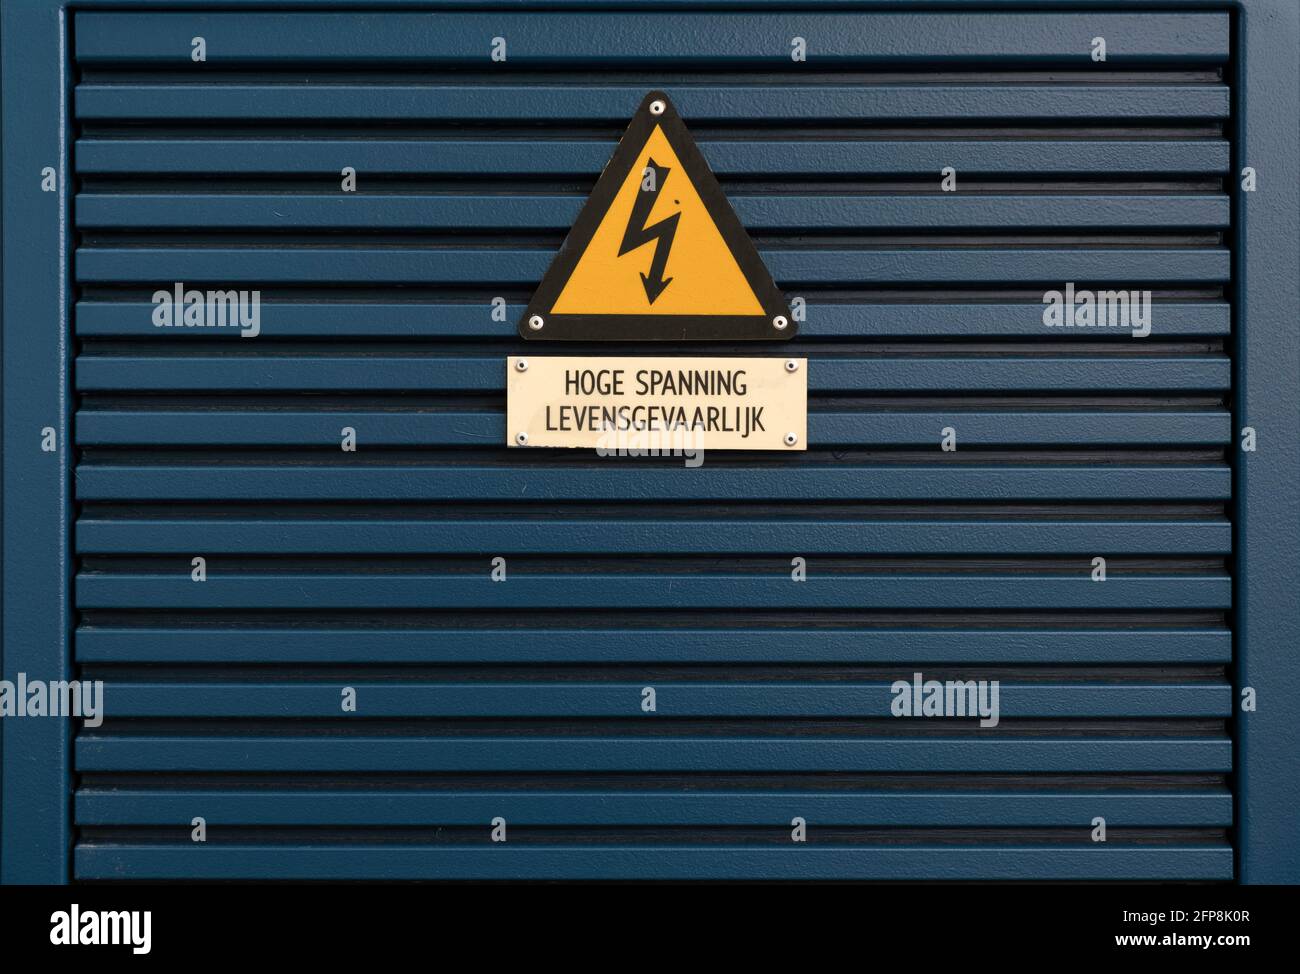 Electrical hazard sign on a triangular yellow sign mounted on a dark blue metal grille with Dutch text 'High Voltage. Dangerous' below it Stock Photo